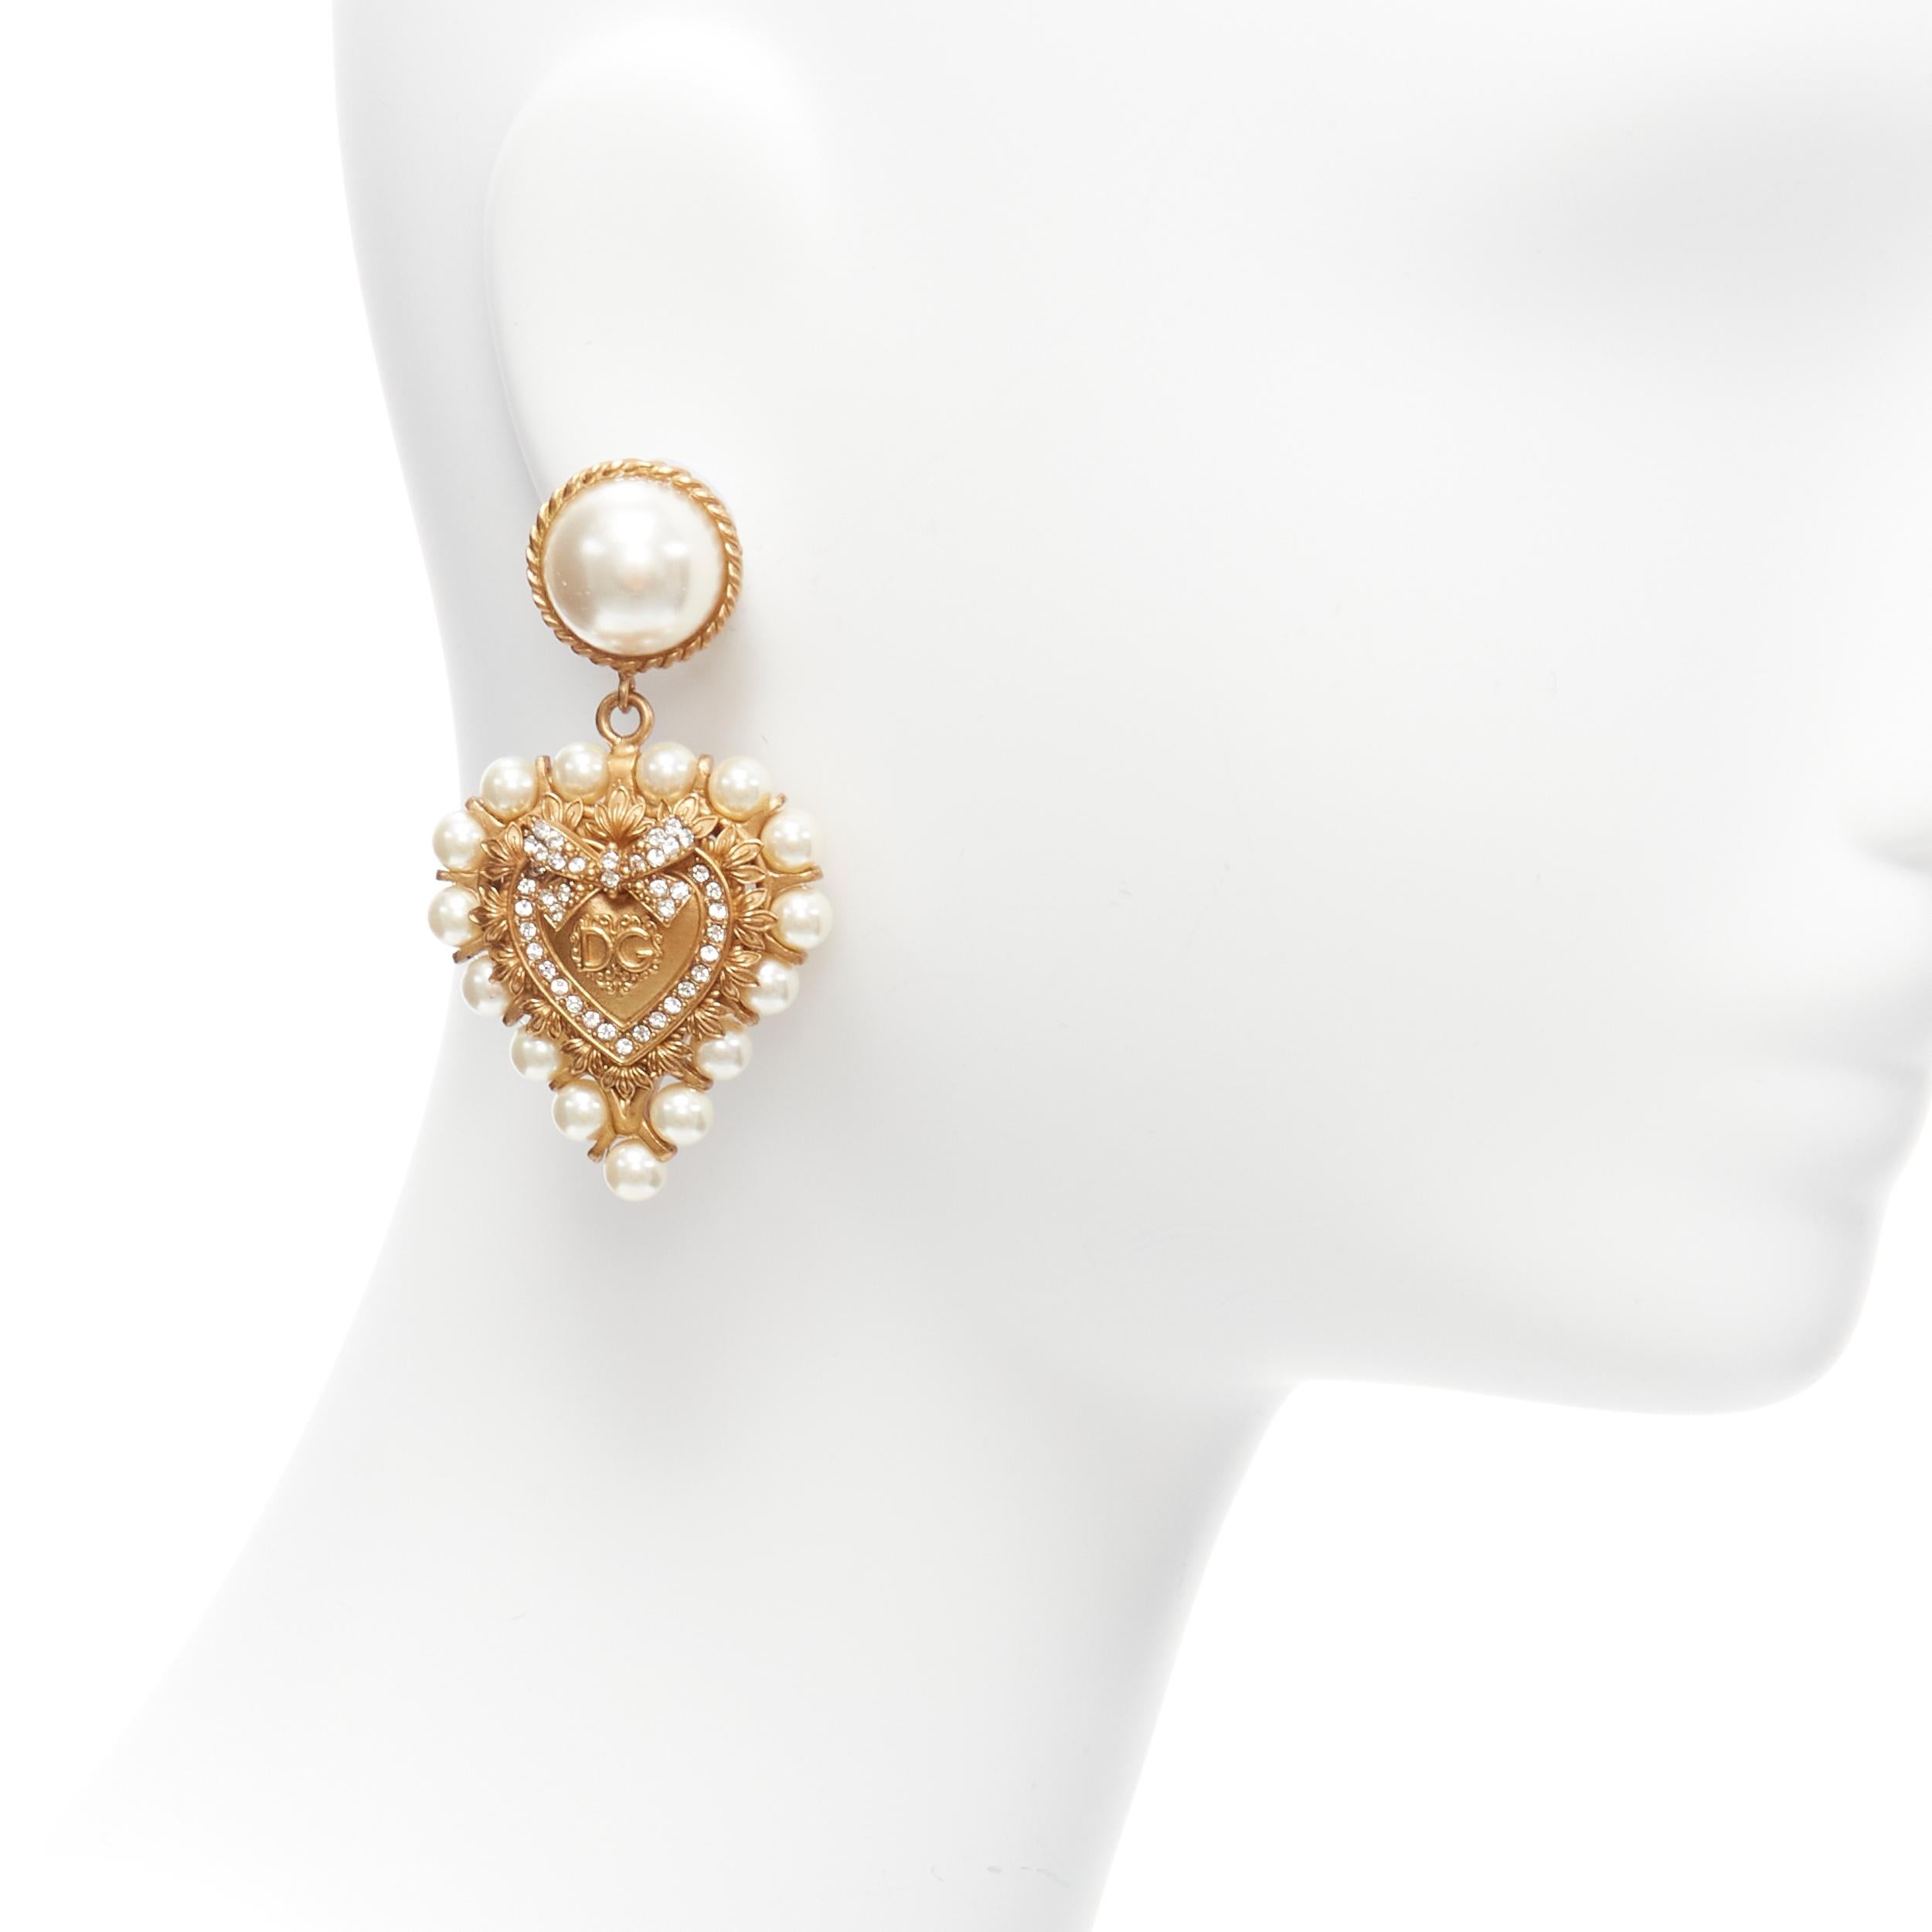 rare DOLCE GABBANA gold tone DG logo baroque pearl heart drop clip earrings
Reference: TGAS/D00187
Brand: Dolce Gabbana
Designer: Domenico Dolce and Stefano Gabbana
Material: Metal, Faux Pearl
Color: Gold, Pearl
Pattern: Solid
Closure: Clip On
Extra